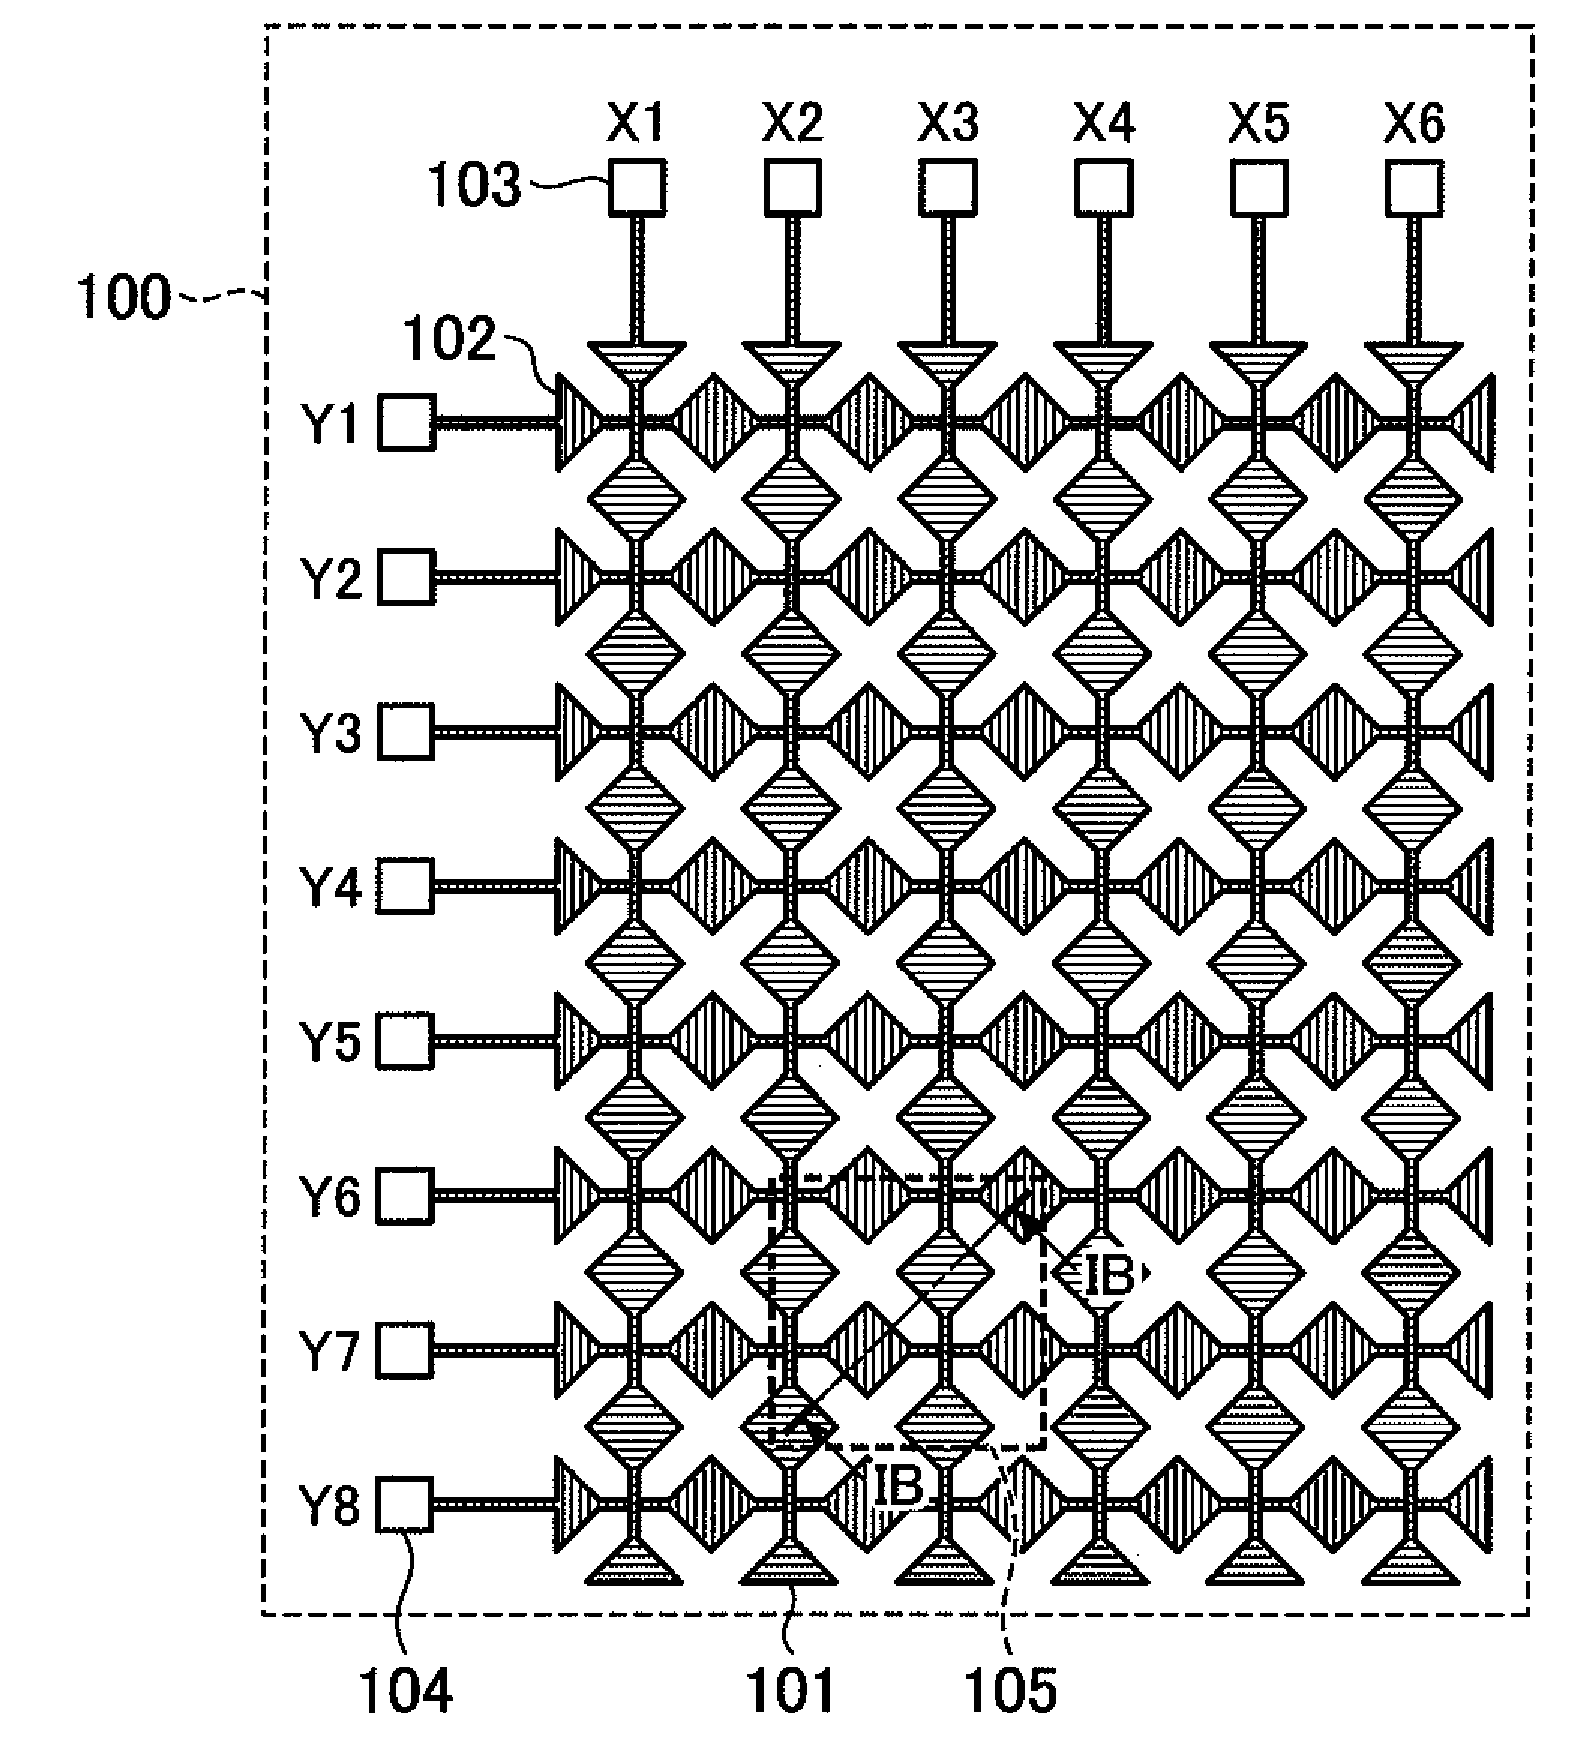 Coordinate input device and display device with the same